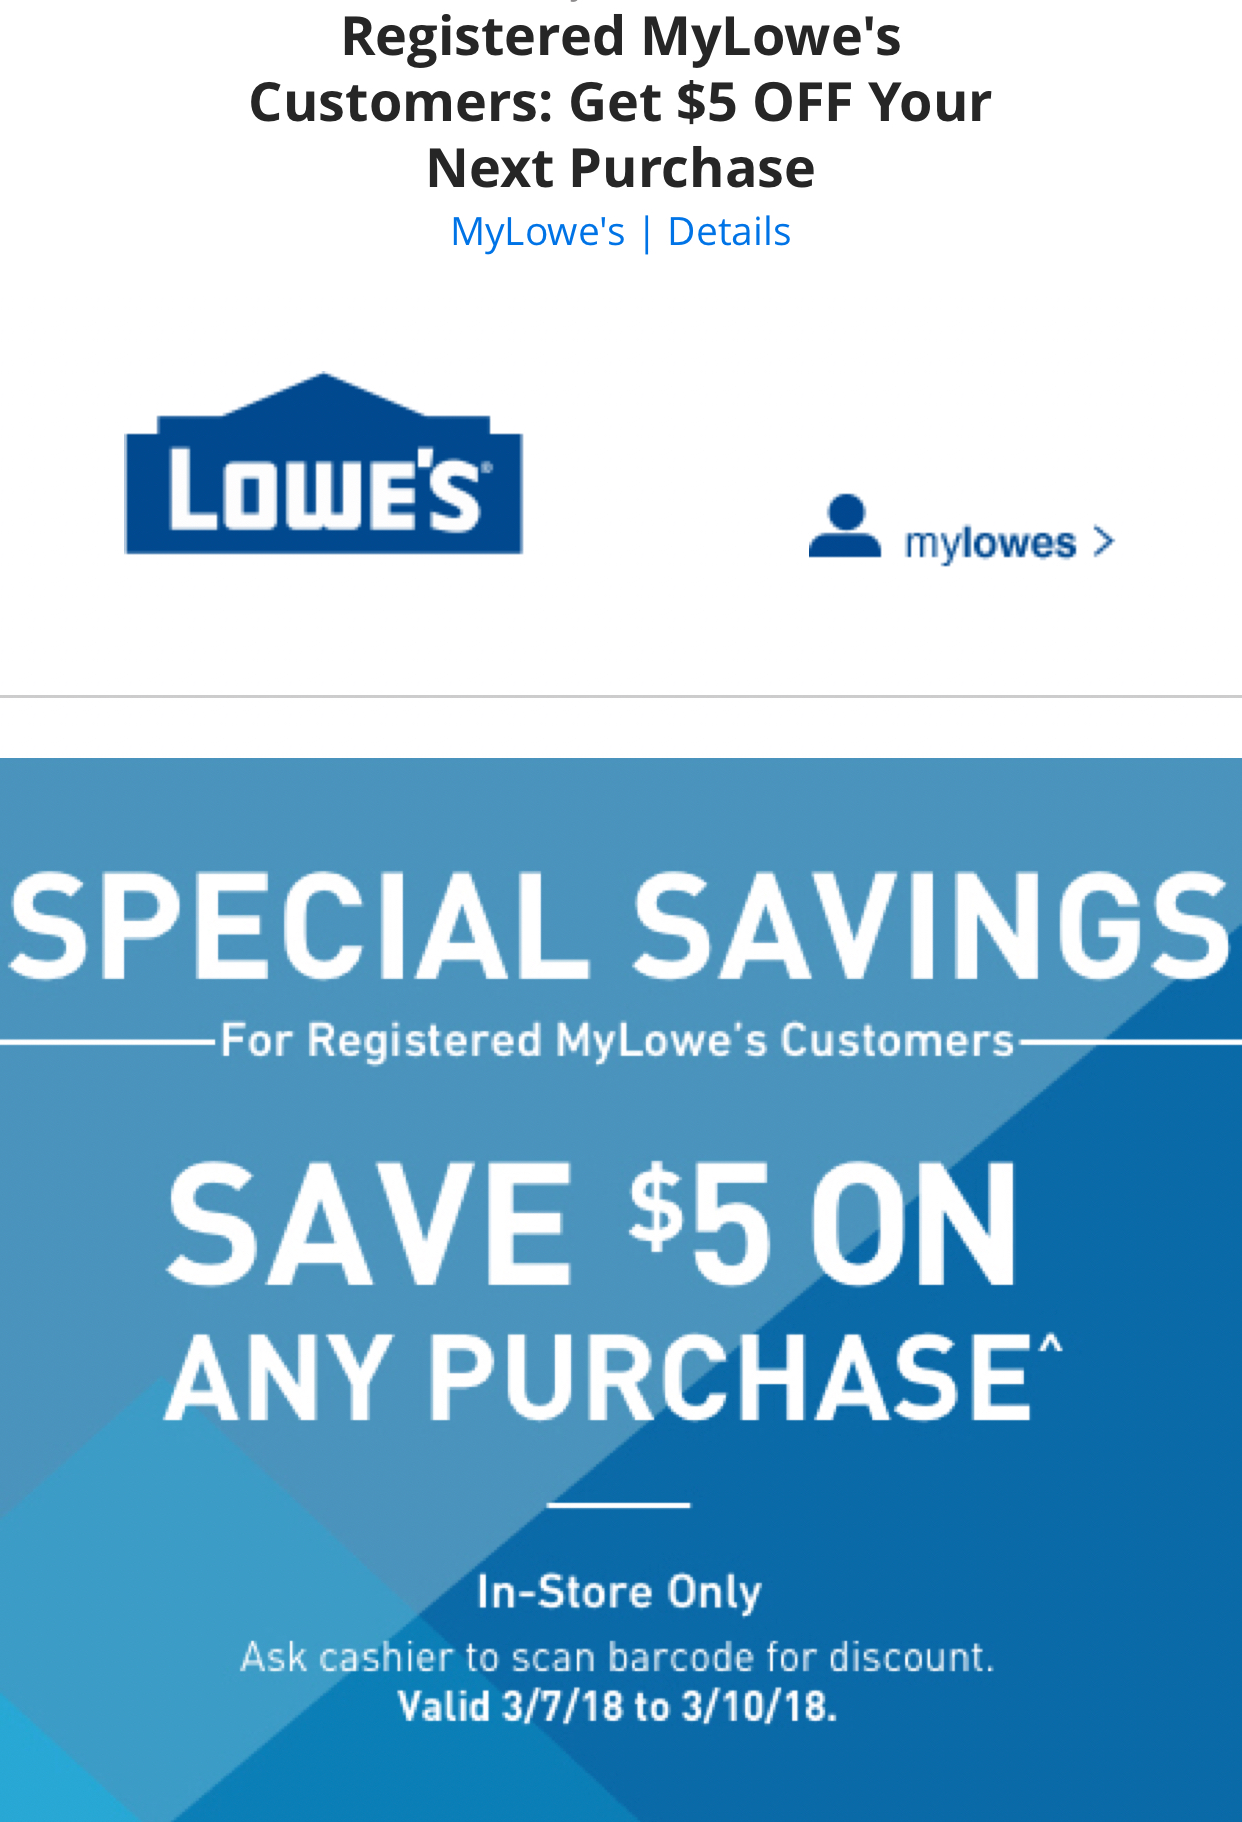 YMMV Check your emails Registered MyLowe s Customers Get $5 OFF